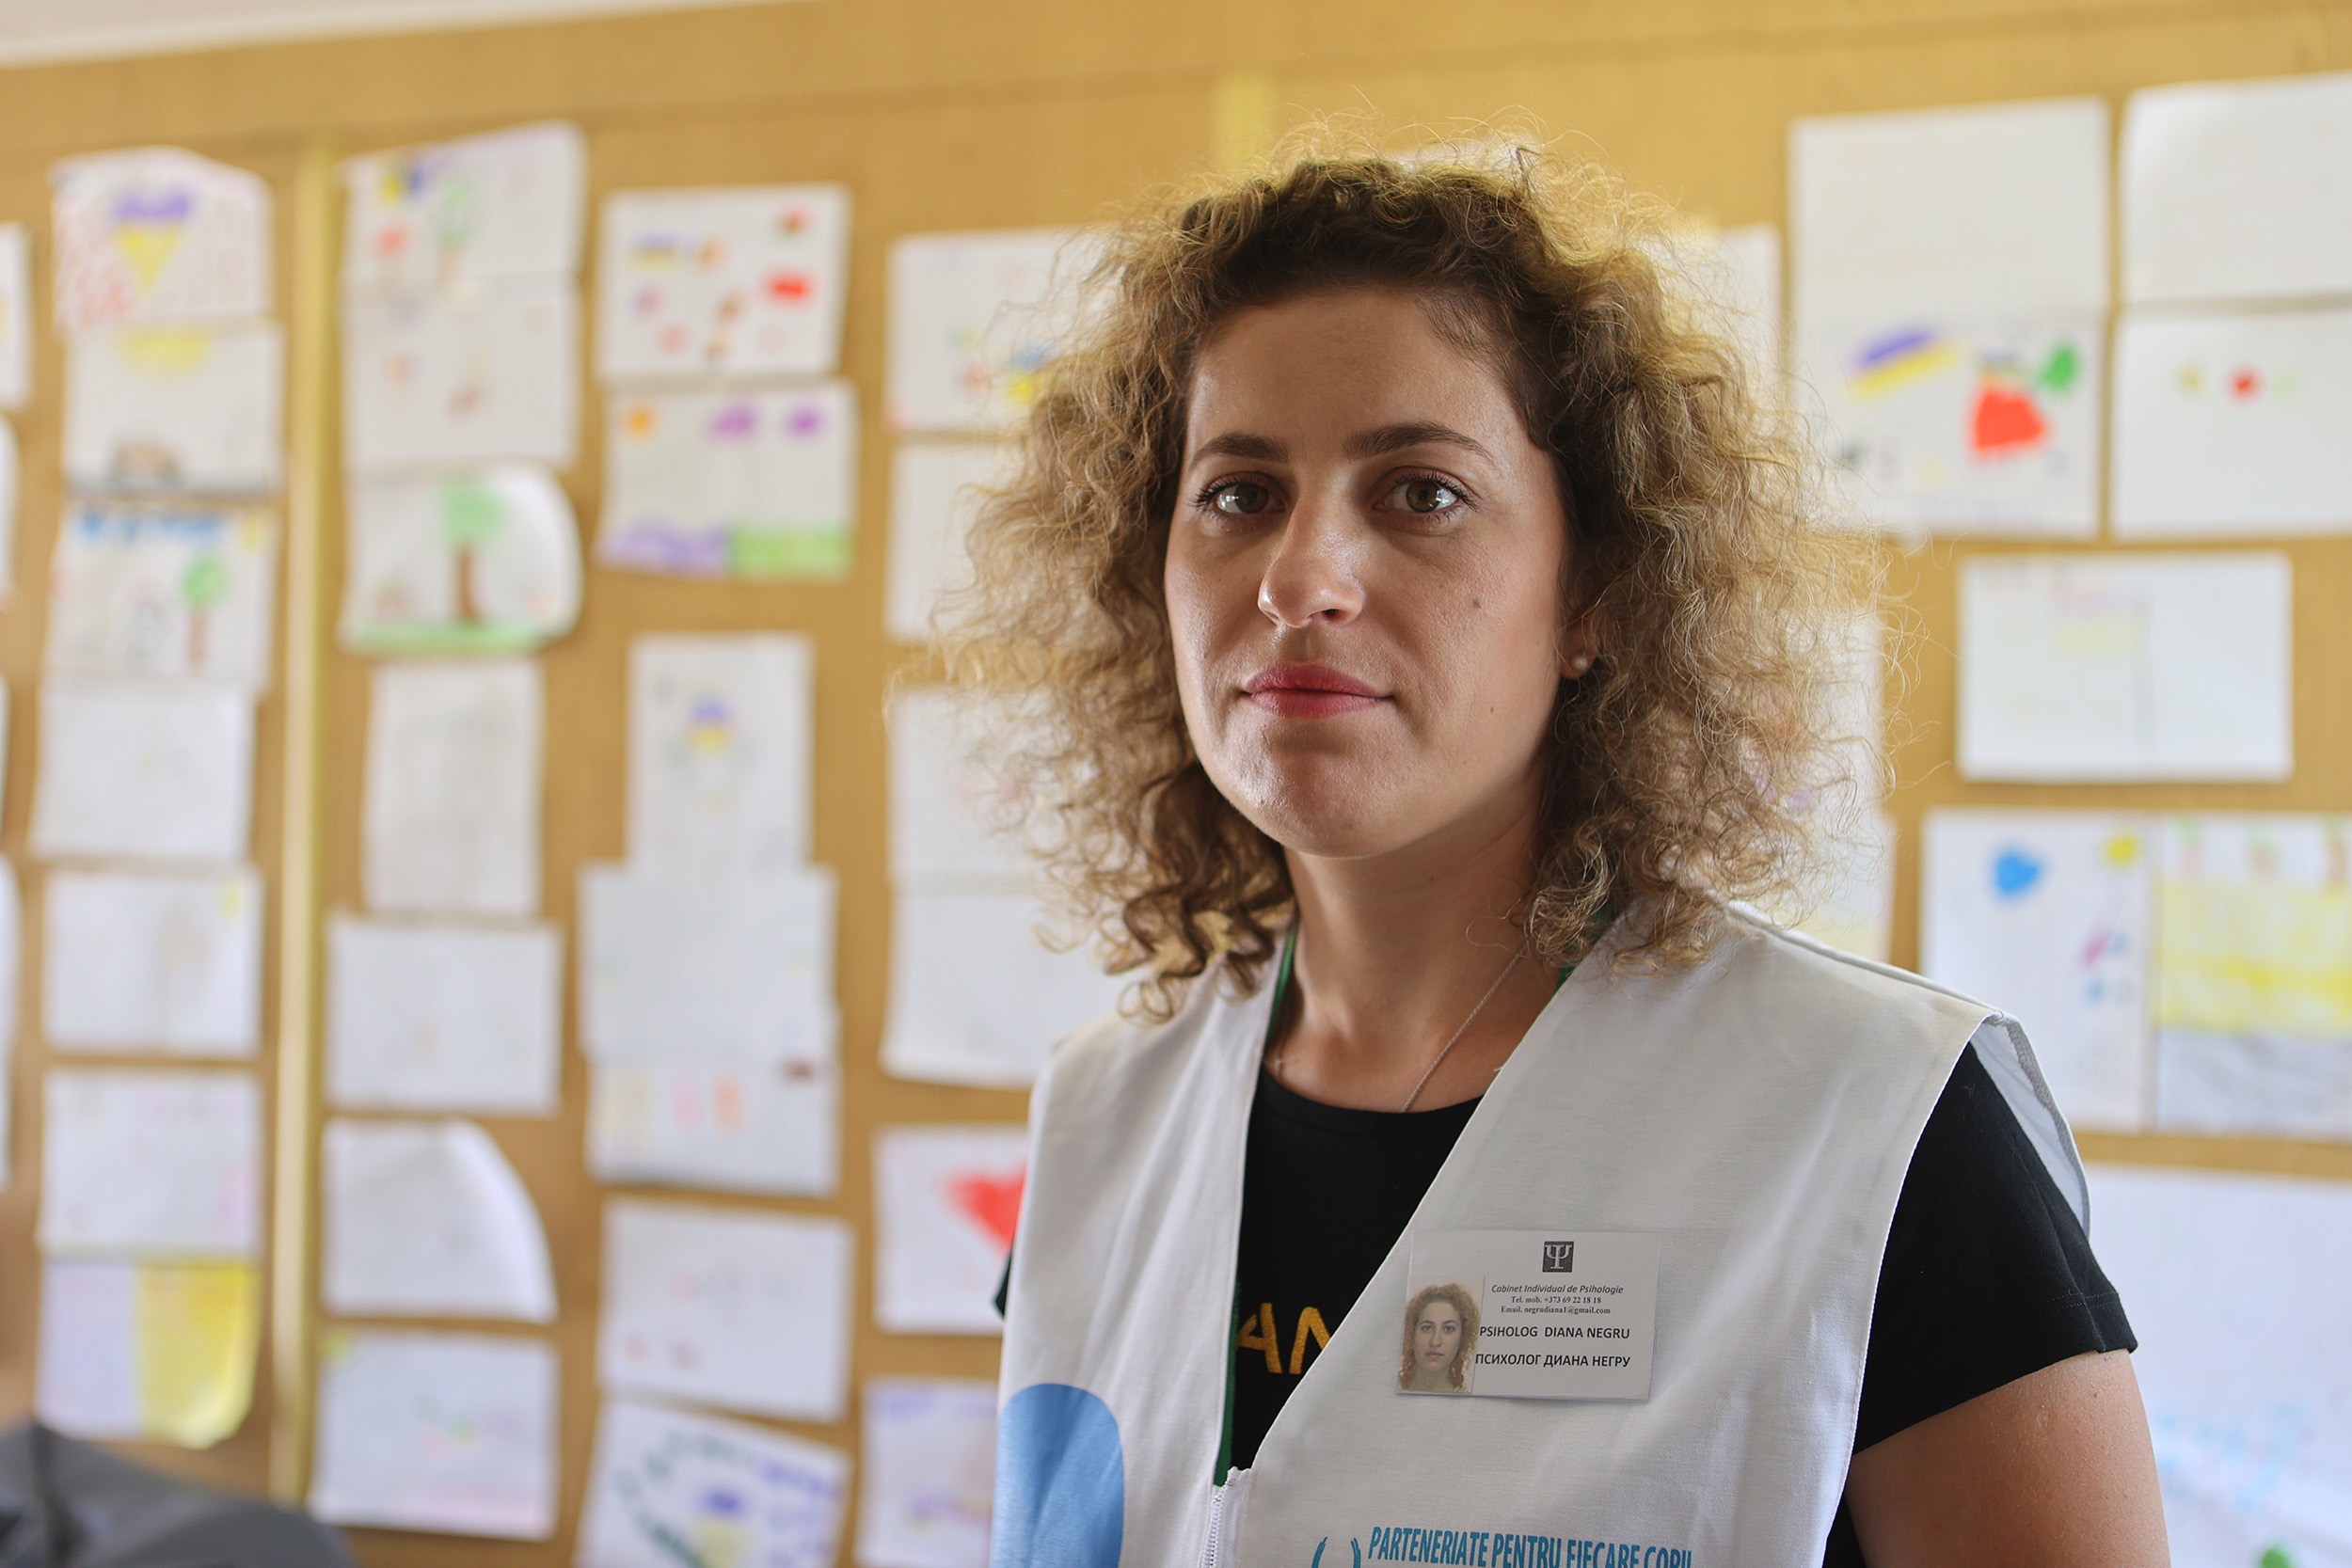 Diana Negru is a psychologist working at the UNICEF Blue Dot Refugee Center in Palanca.